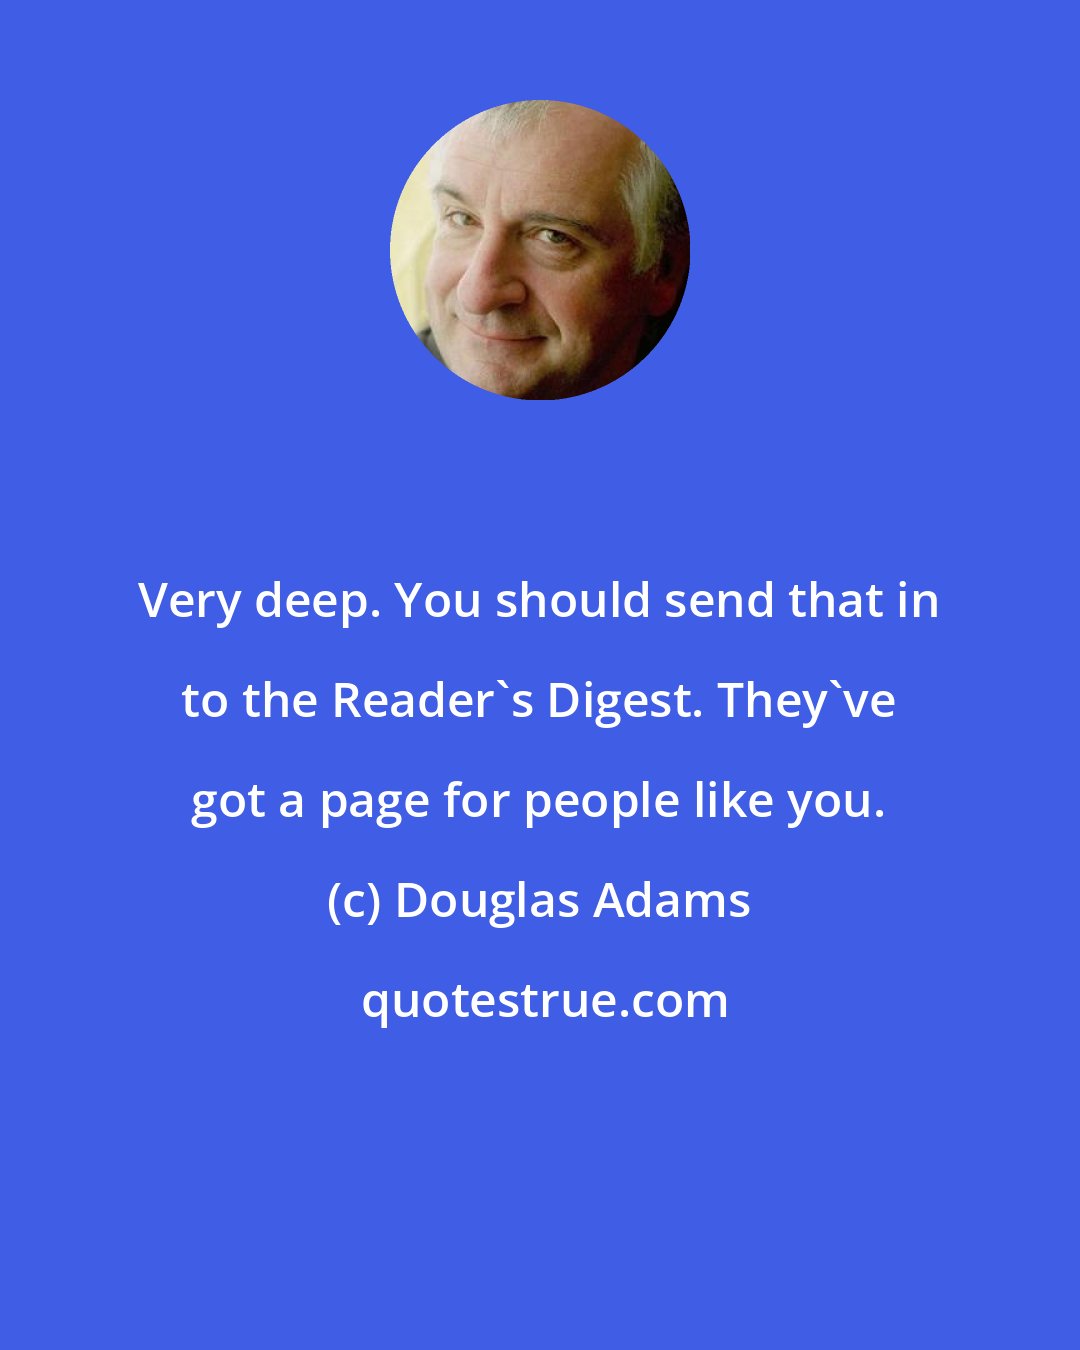 Douglas Adams: Very deep. You should send that in to the Reader's Digest. They've got a page for people like you.